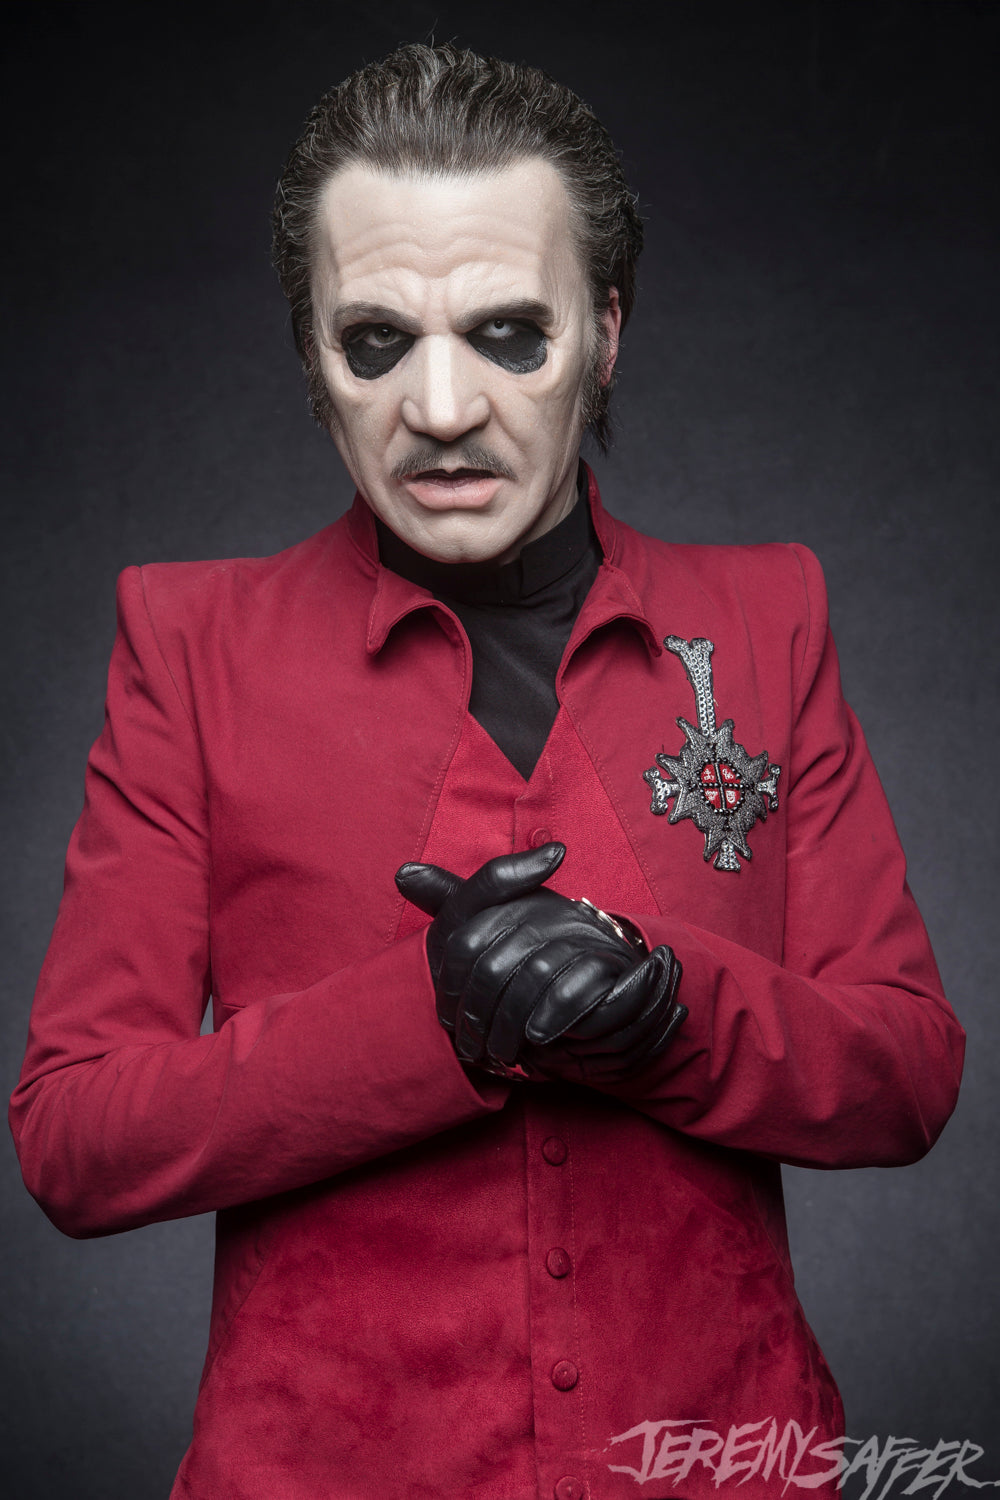 Ghost - Cardinal Copia in red - 8x12 test print